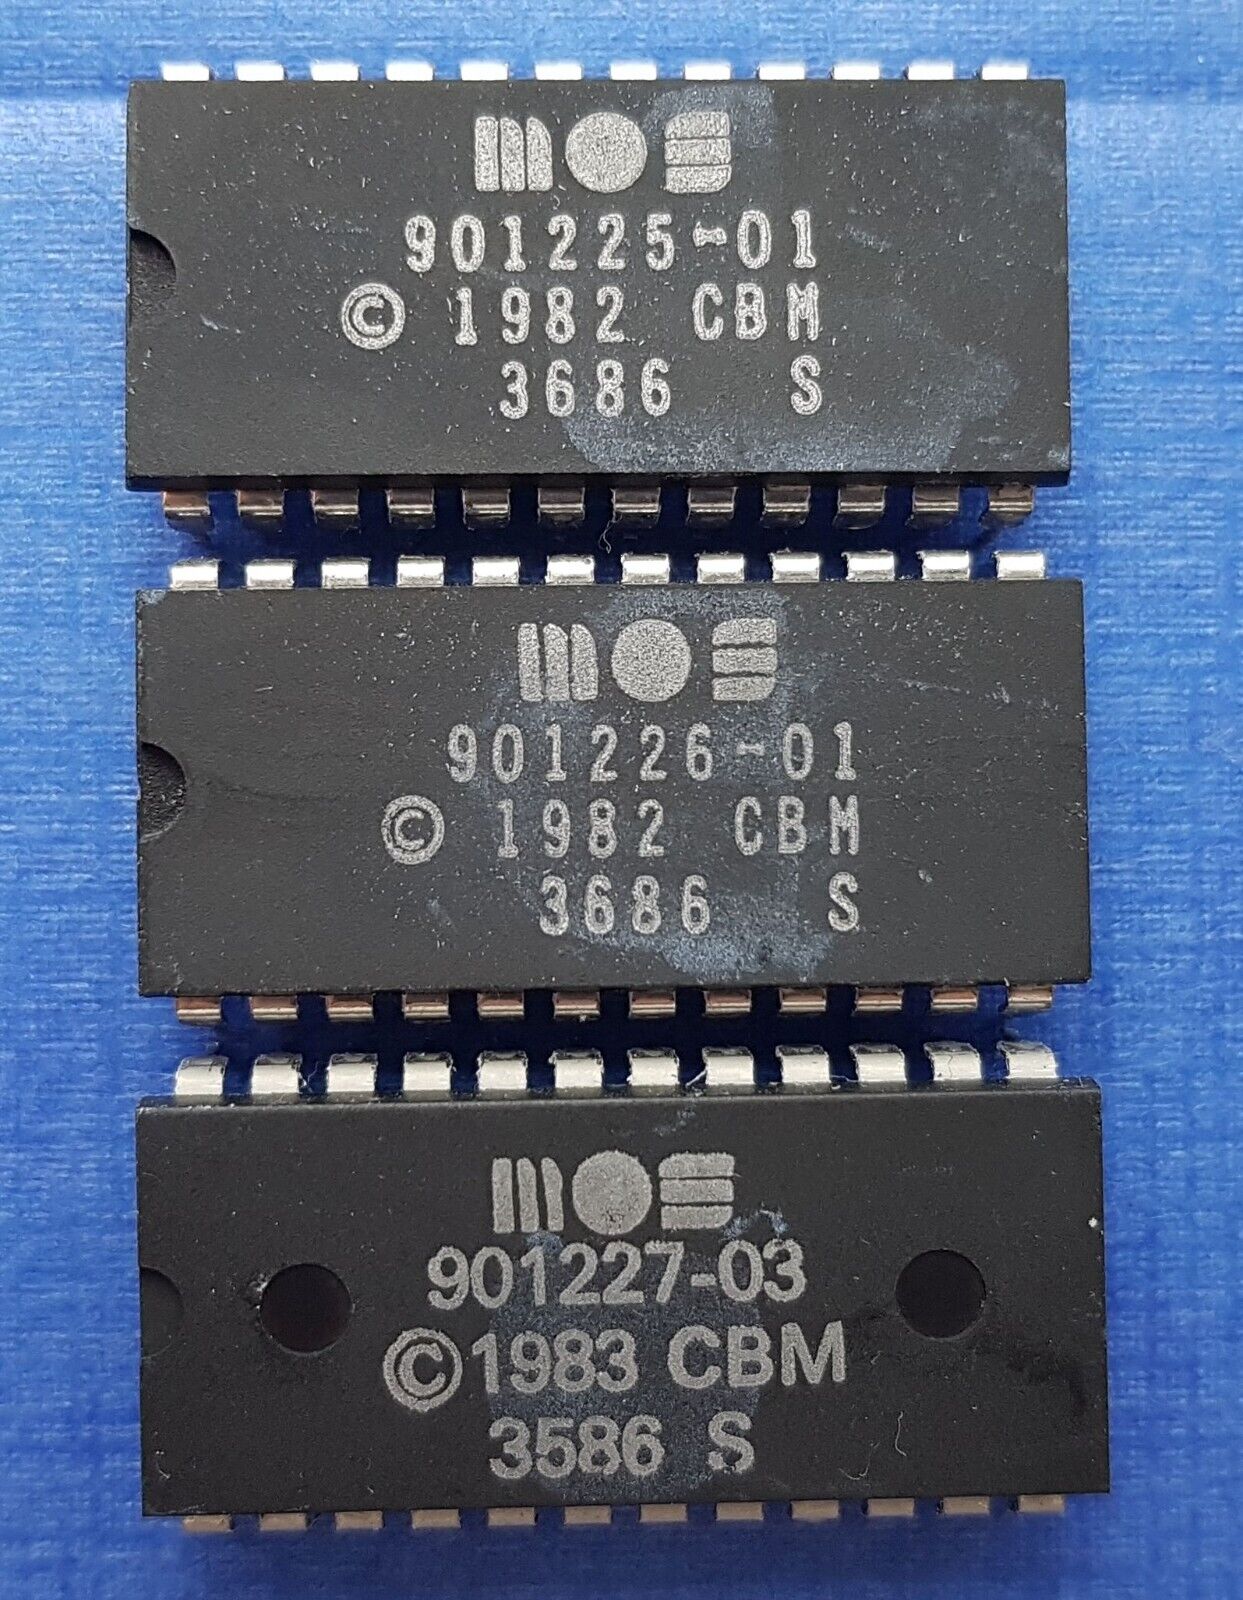 MOS 901225-01/901226-01/901227-03 Character/BASIC/Kernal ROM chips Commodore 64